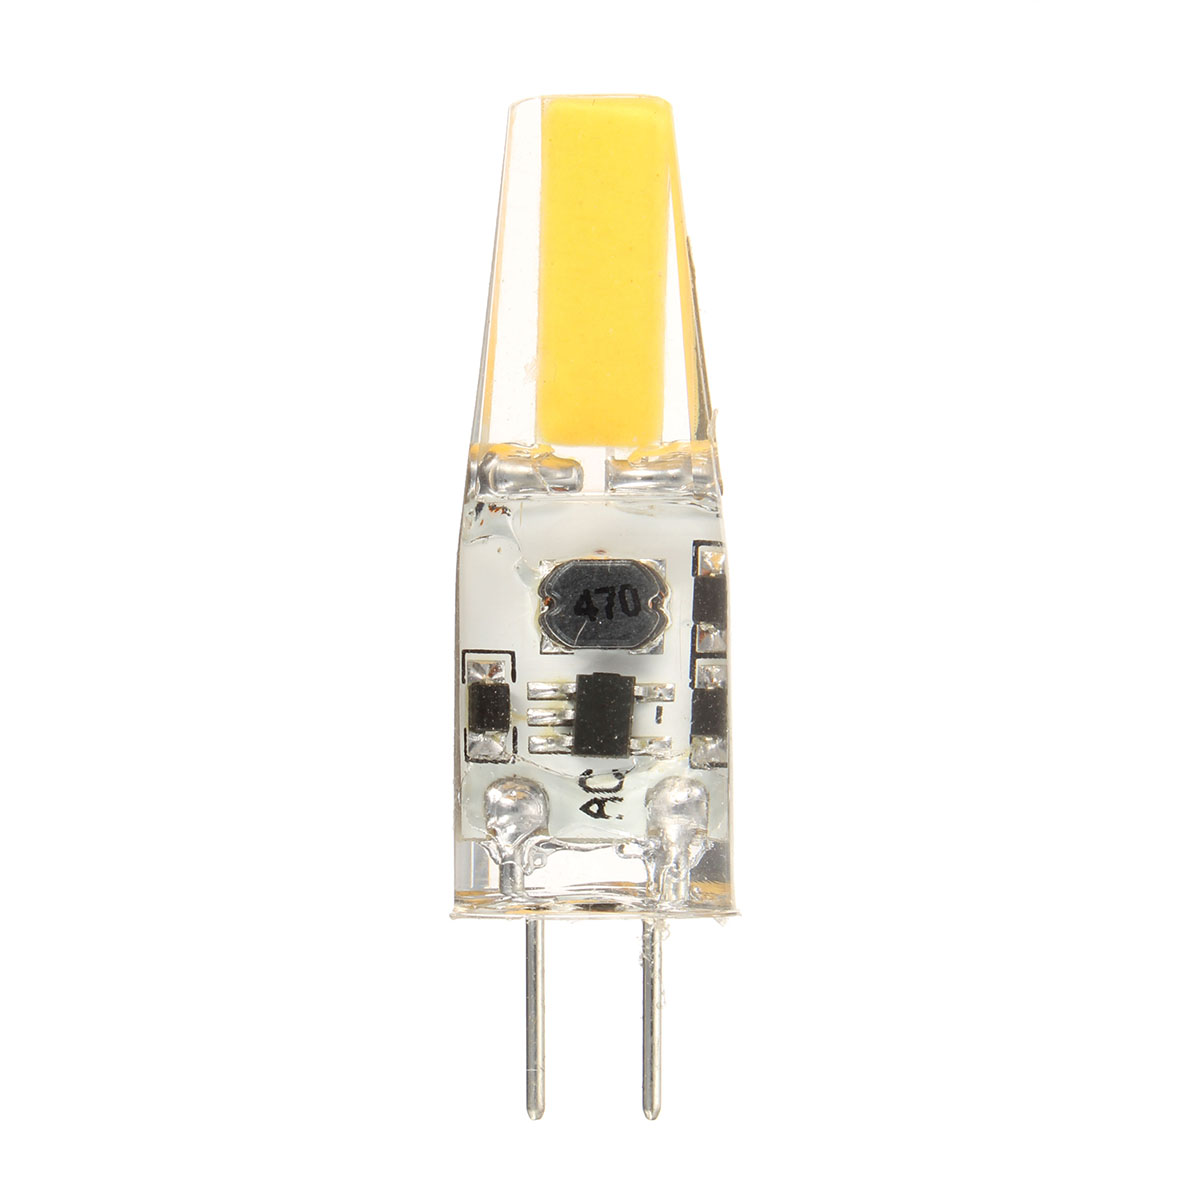 20X-Dimmable-G4-2W-Warm-White-COB-LED-Bulb-Chandelier-Light-Replace-Halogen-Lamps-DCAC12V-1454552-2